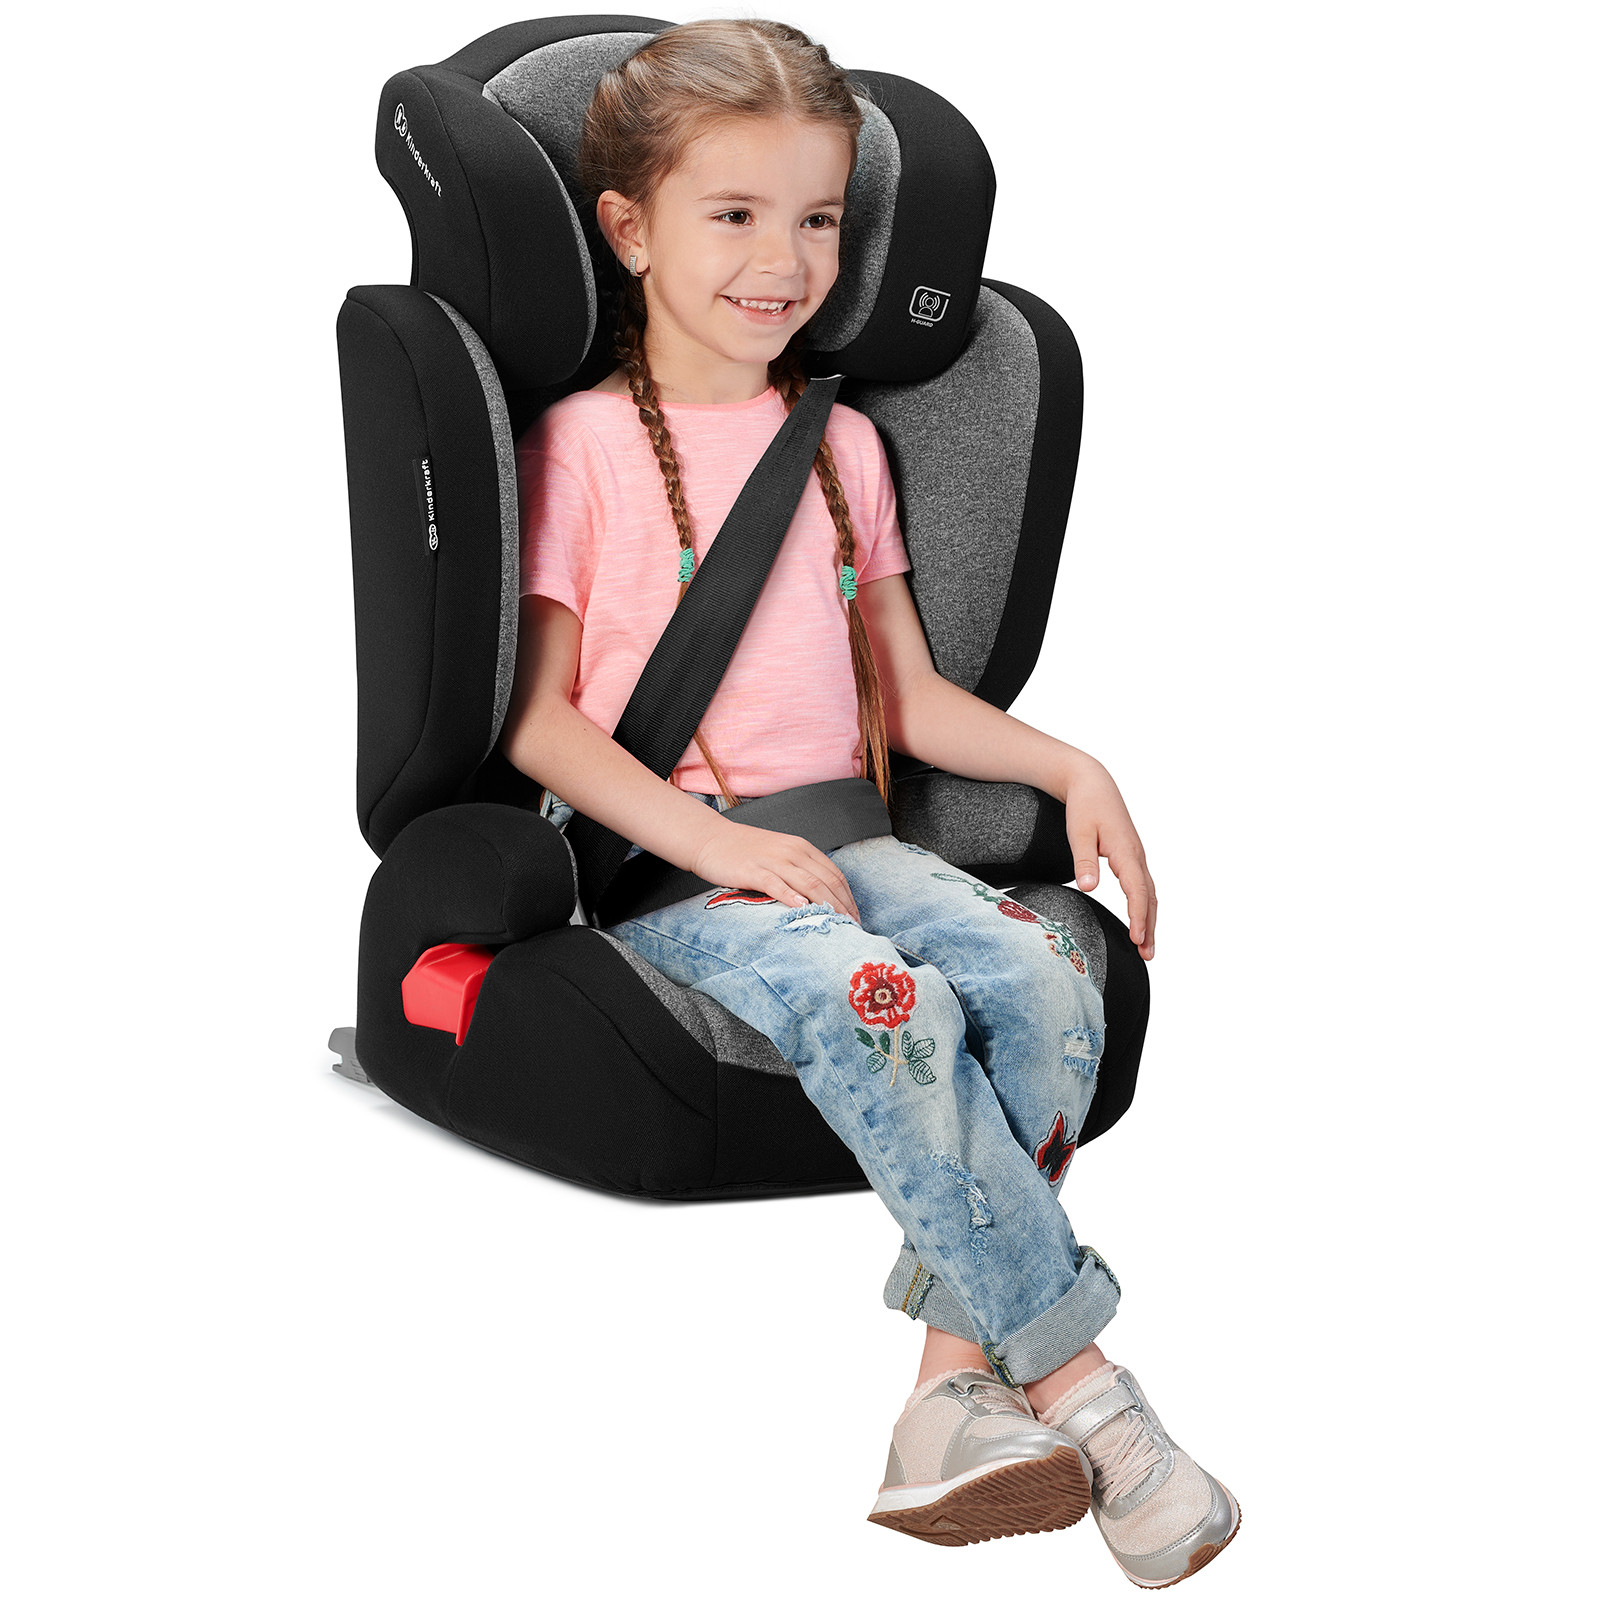 Discover the XPAND car seat